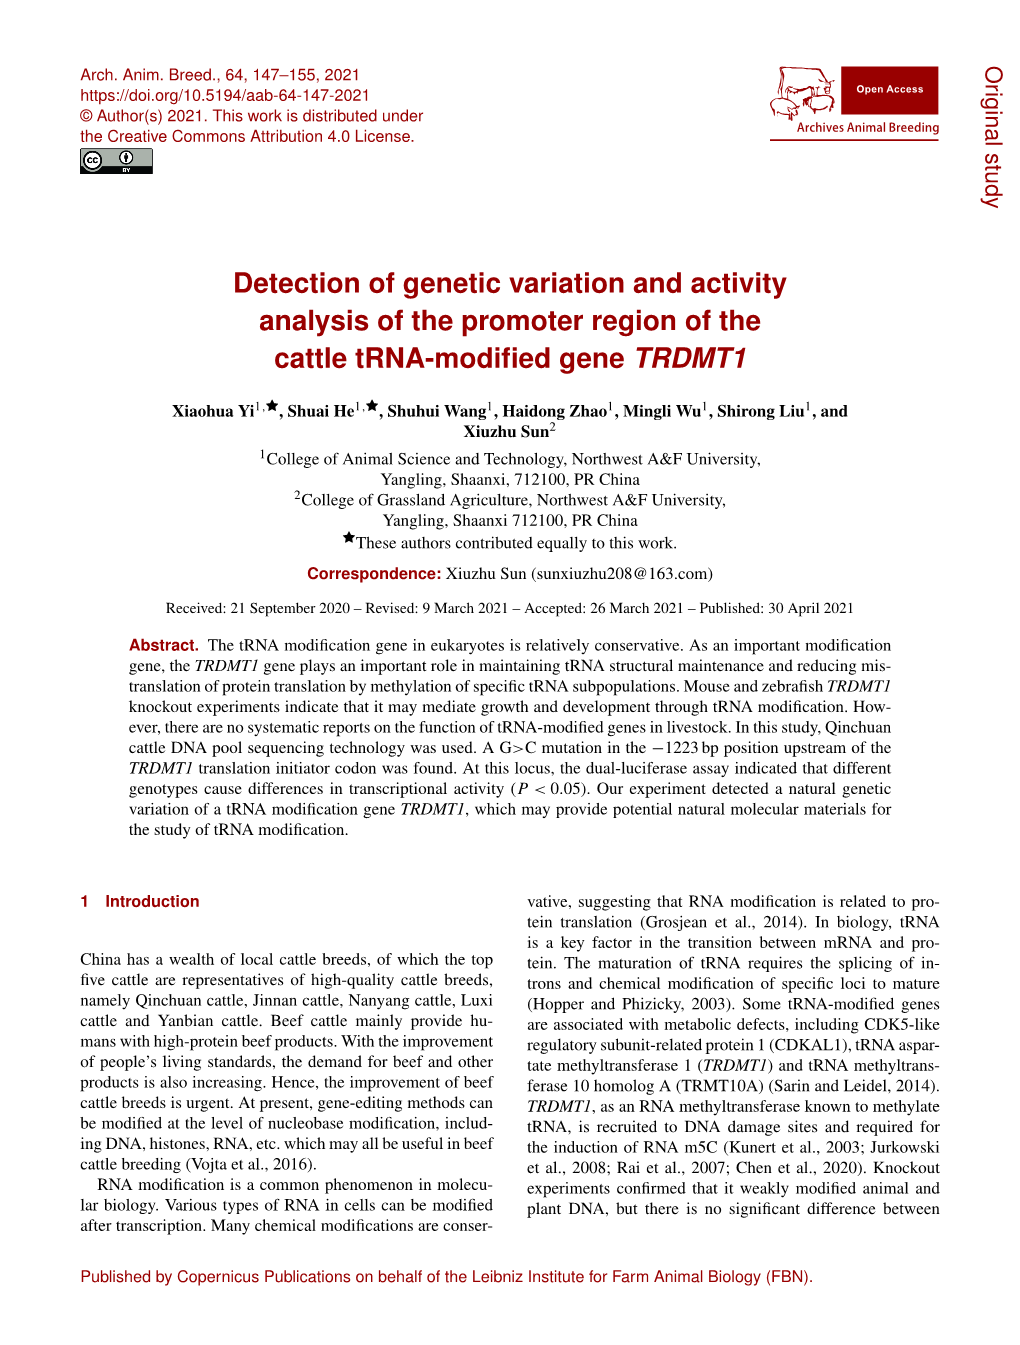 Detection of Genetic Variation and Activity Analysis of the Promoter Region of the Cattle Trna-Modiﬁed Gene TRDMT1